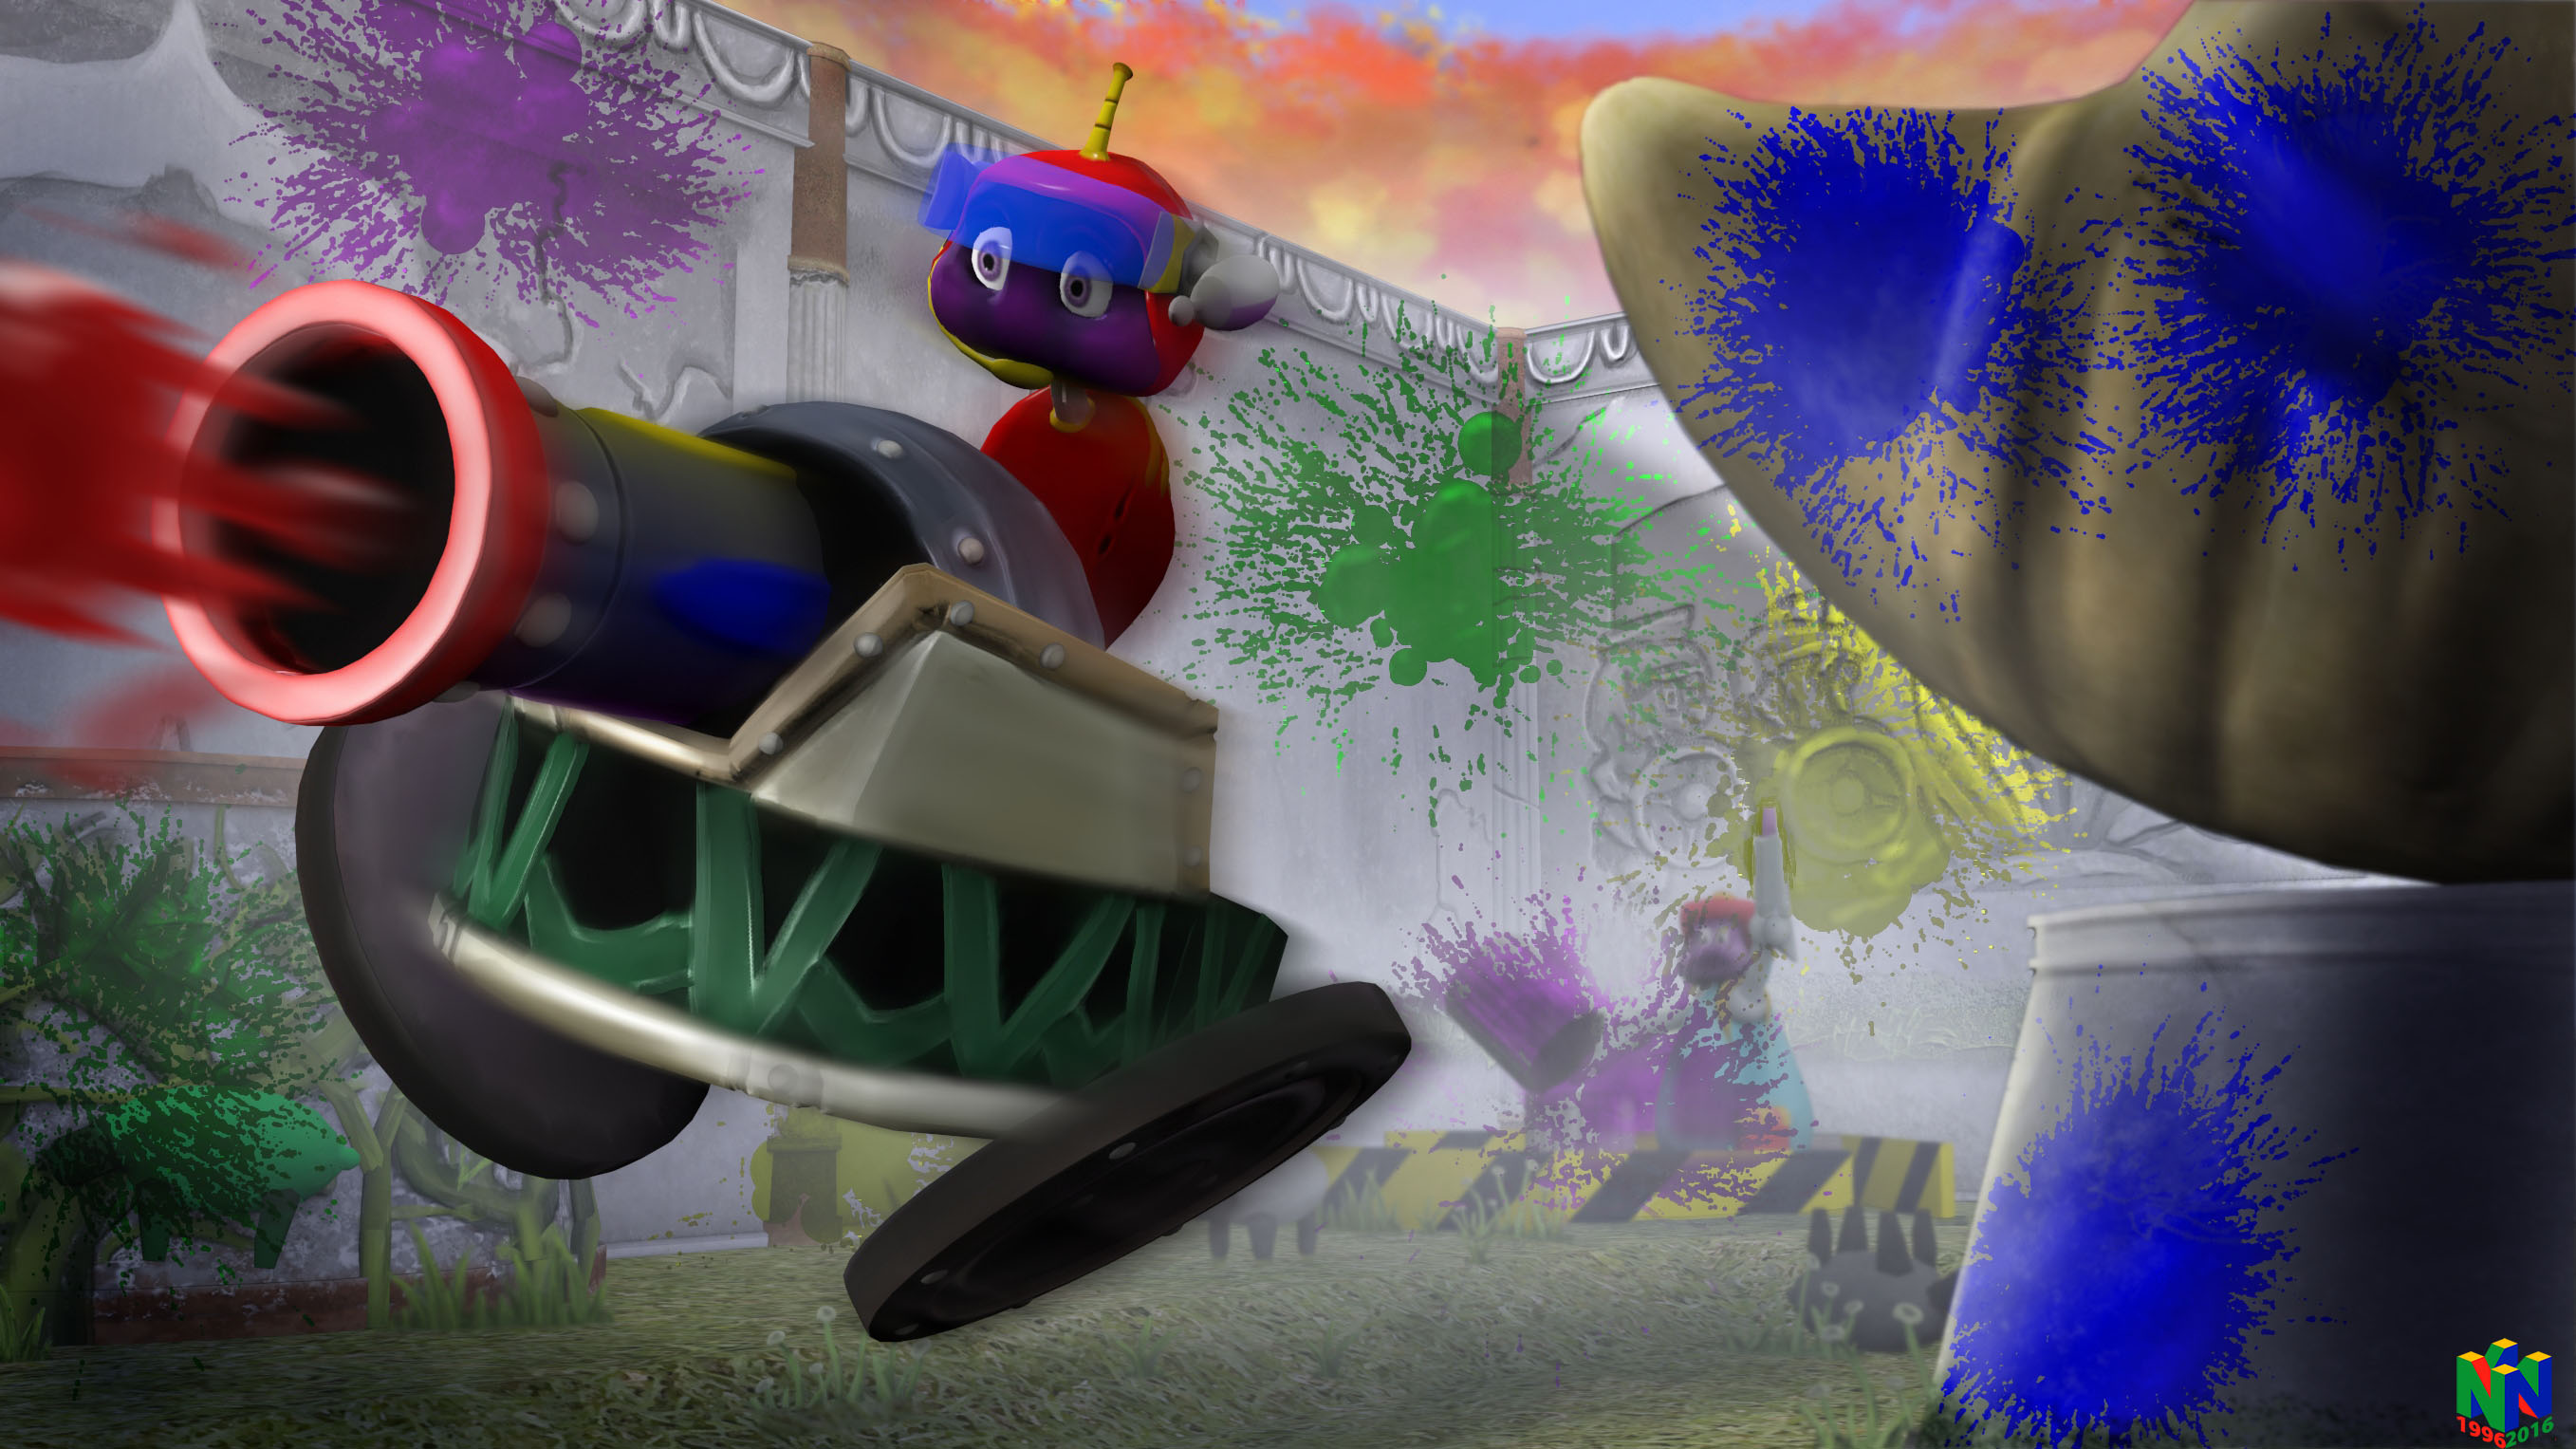 Rocket Robots on Wheels for the Nintendo 64 Tribute by Yggdrassal